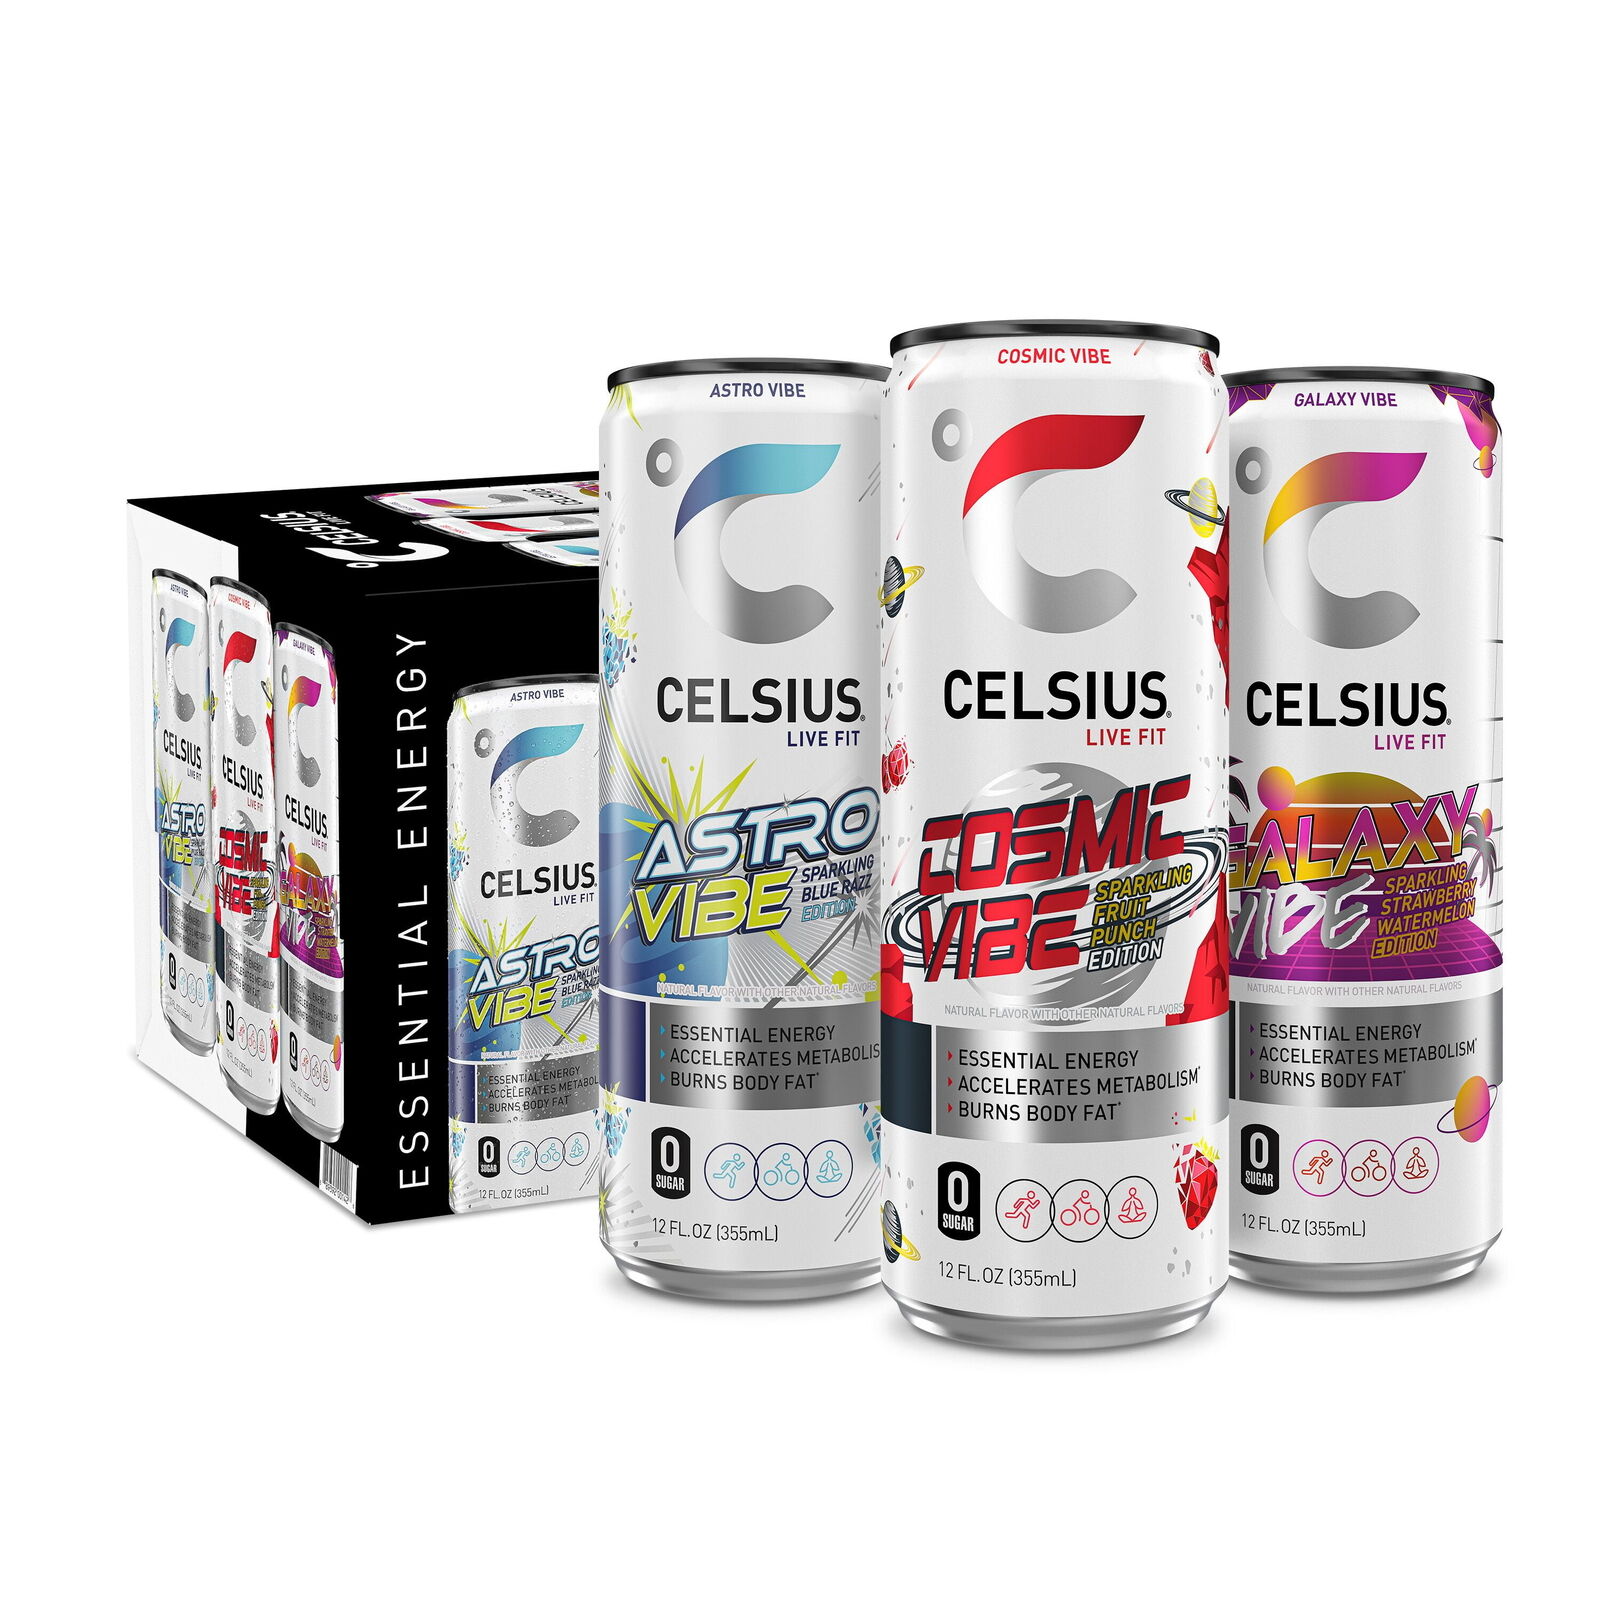 CELSIUS Sparkling Space Variety Pack, Functional Essential Energy Drink 12 fl oz